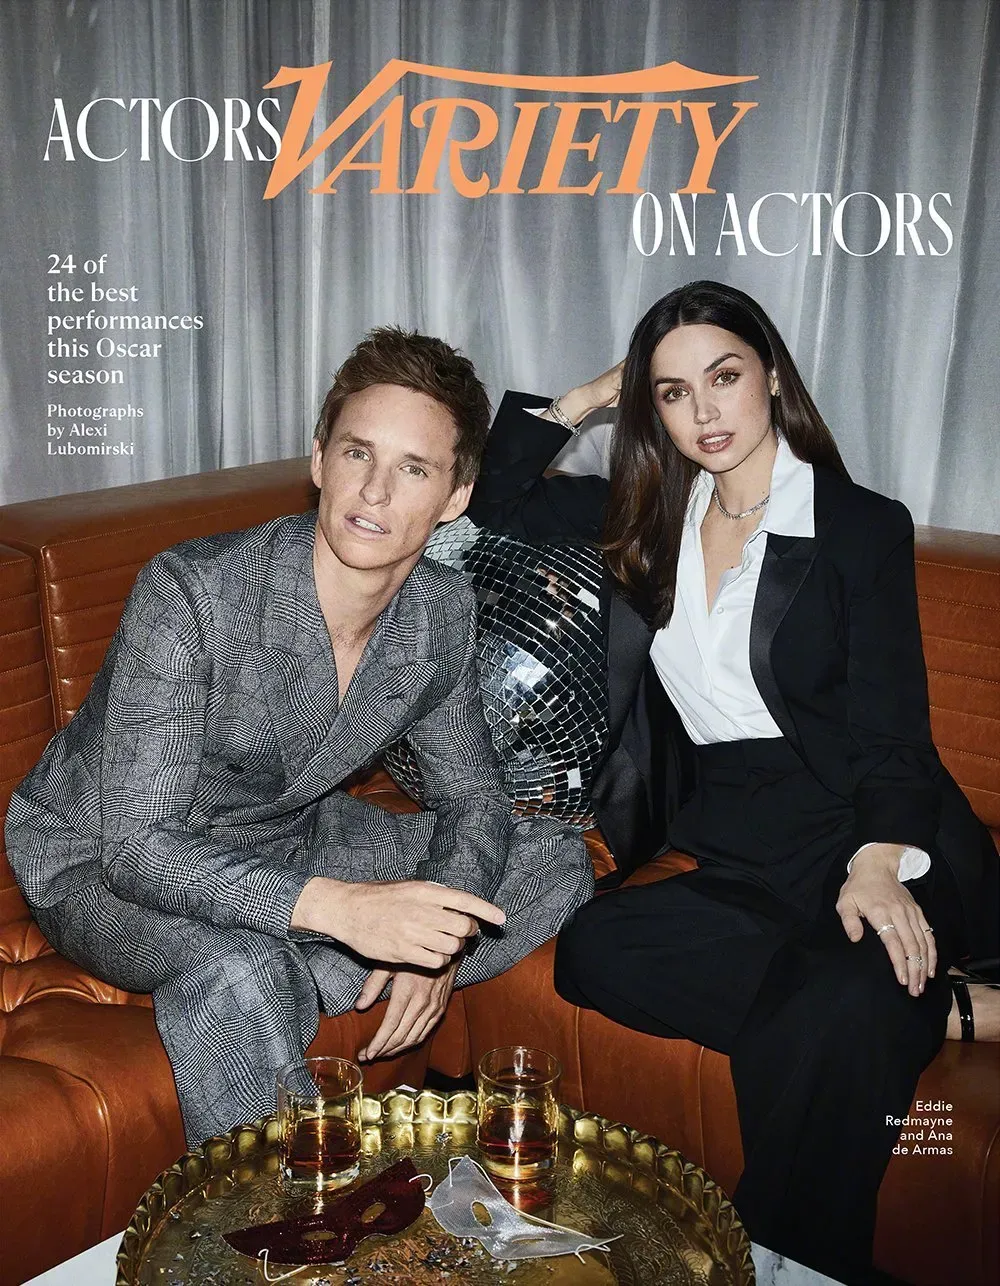 'Variety' magazine's 'Actors ON Actors' session cover | FMV6